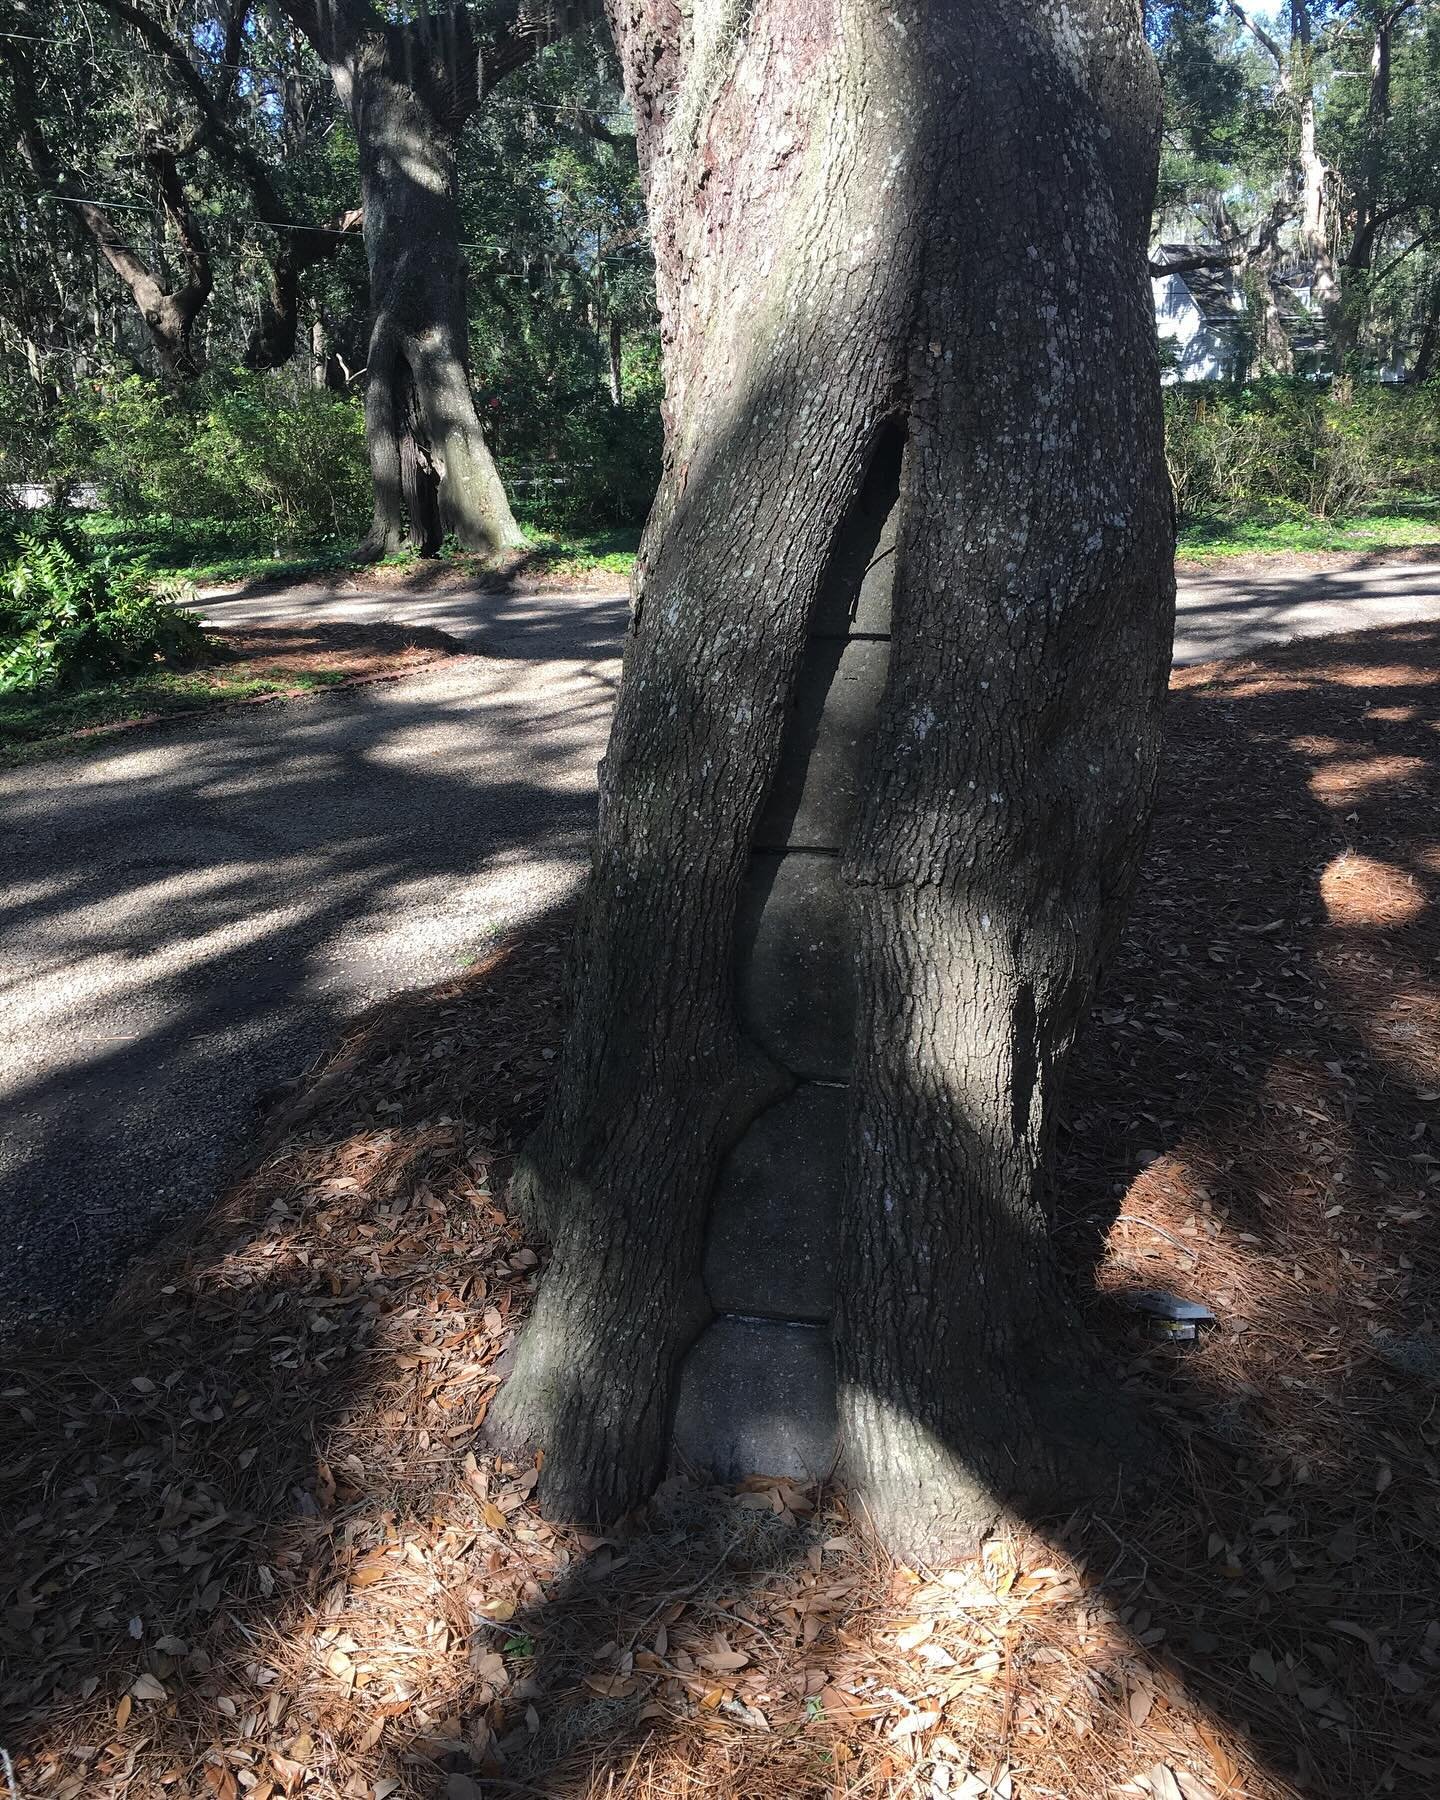 Discovered a group of trees with cavities filled with cement... an outdated solution with modern consequences. While it might seem like a quick fix, it is important to consider the downsides. Cement can hinder natural sealing processes, impact tree v